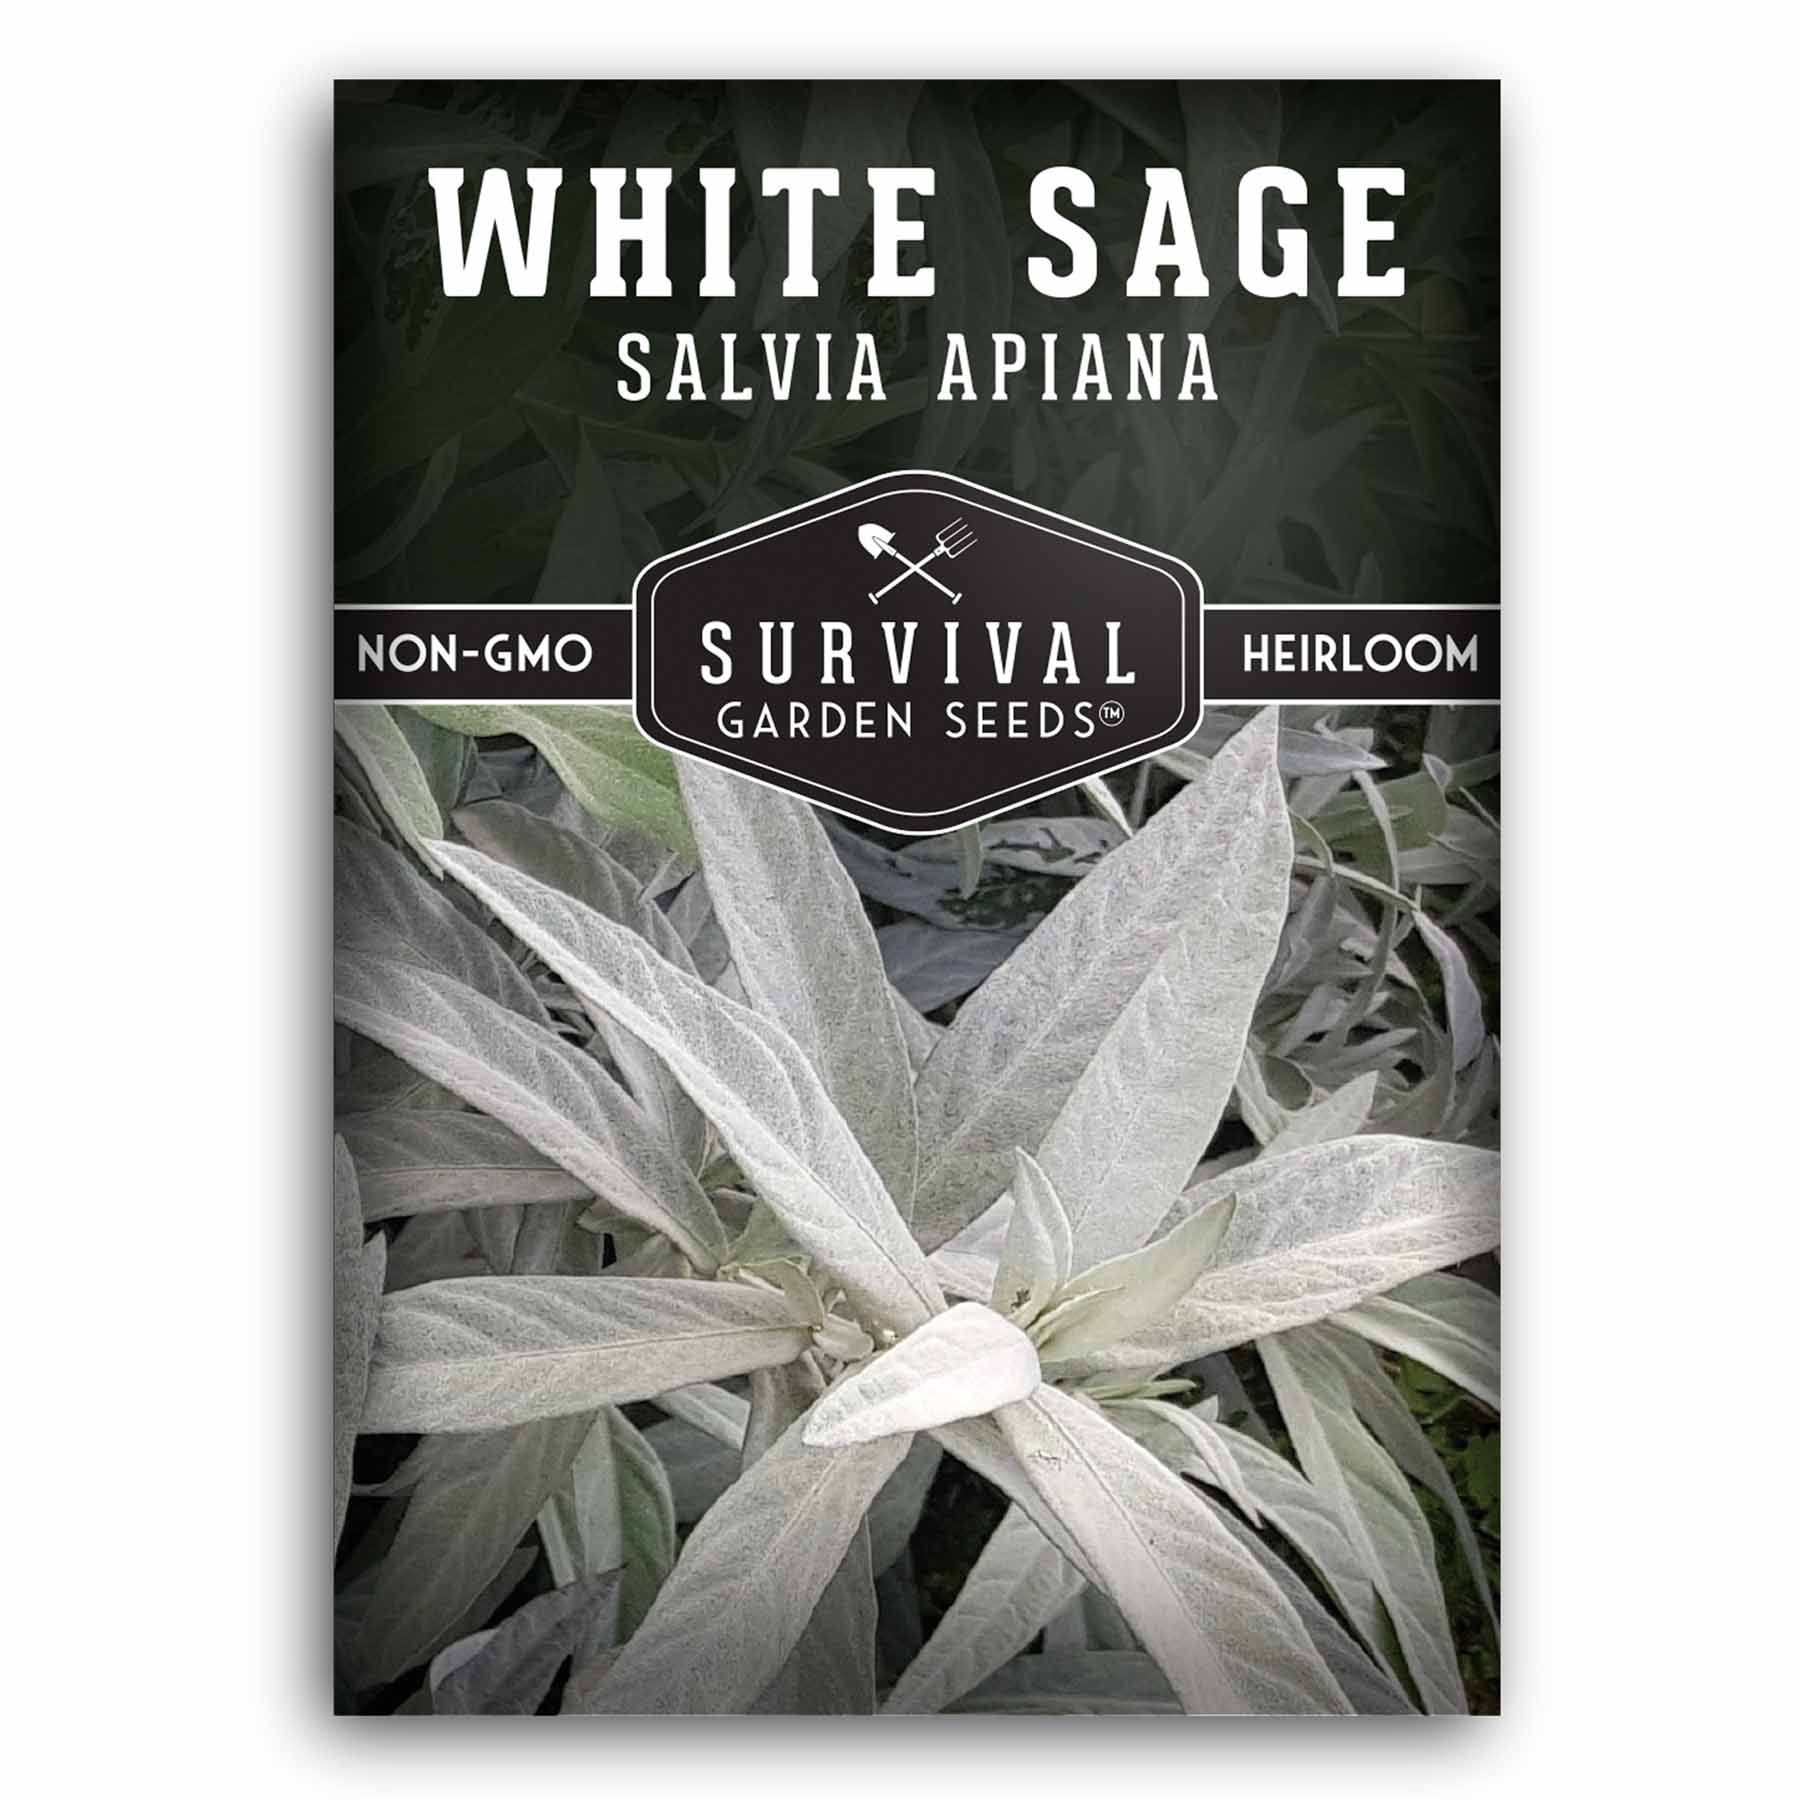 1 packet of White Sage Seeds